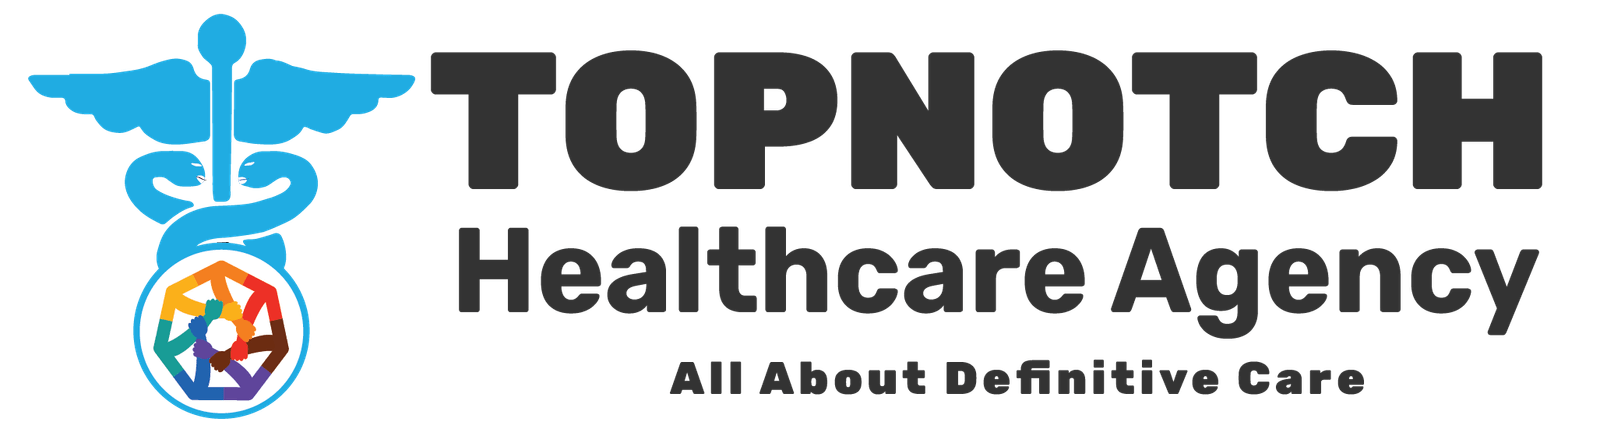 Topnotch Healthcare Agency  - cropped New Topnotch 01 - Header Centered( 2 floors,burger,btn,cart)